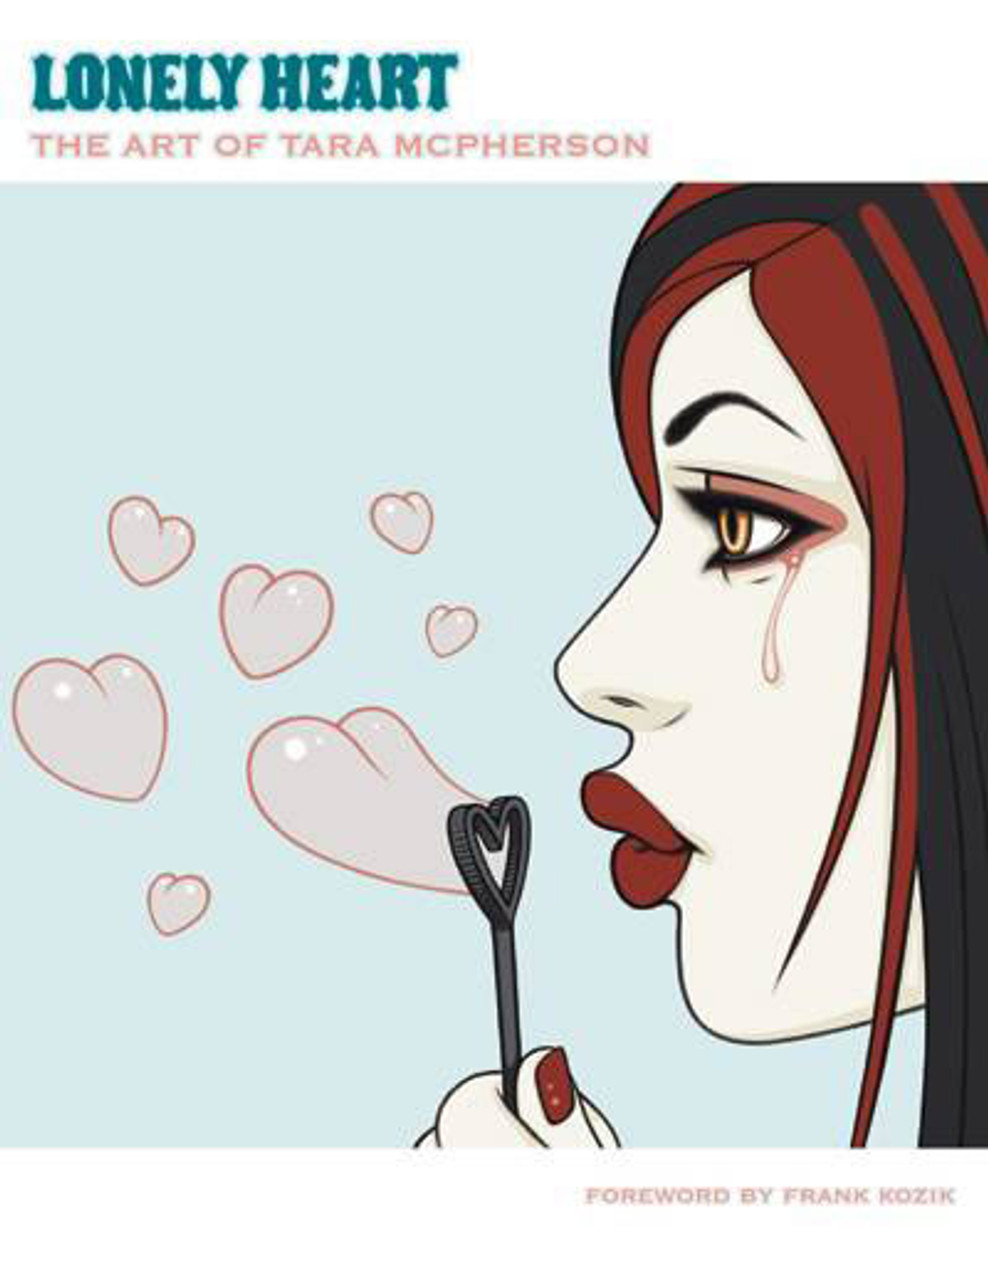 Lonely Heart: The Art of Tara McPherson Book Hard Cover